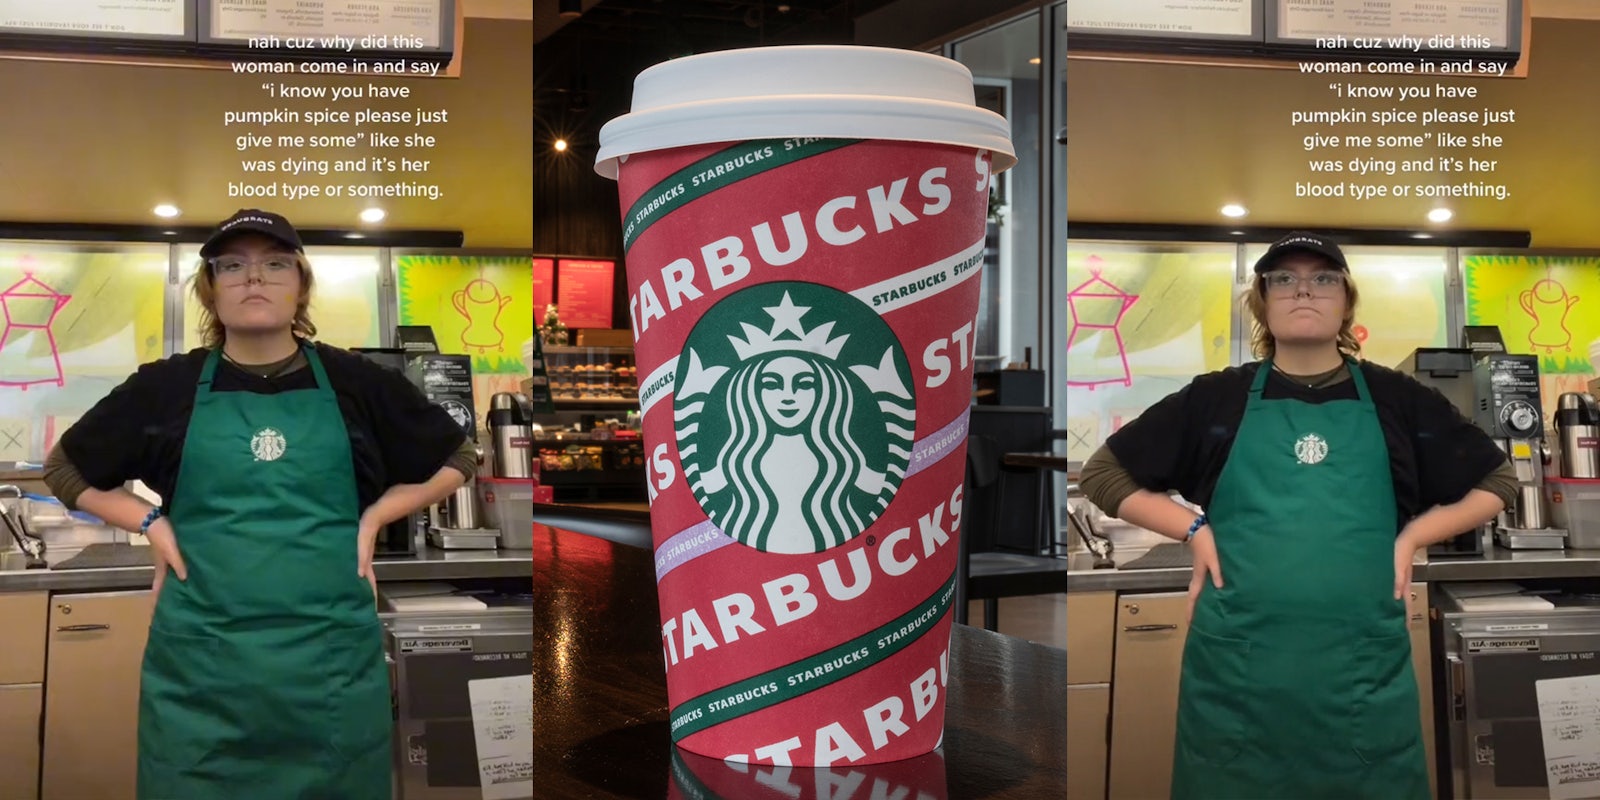 starbucks worker with hands on her hips and caption 'nah cuz why did this woman come in and say 'i know you have pumpkin spice please just give me some' like she was dying and it's her blood type or something' (l&r) starbucks seasonal cup (c)